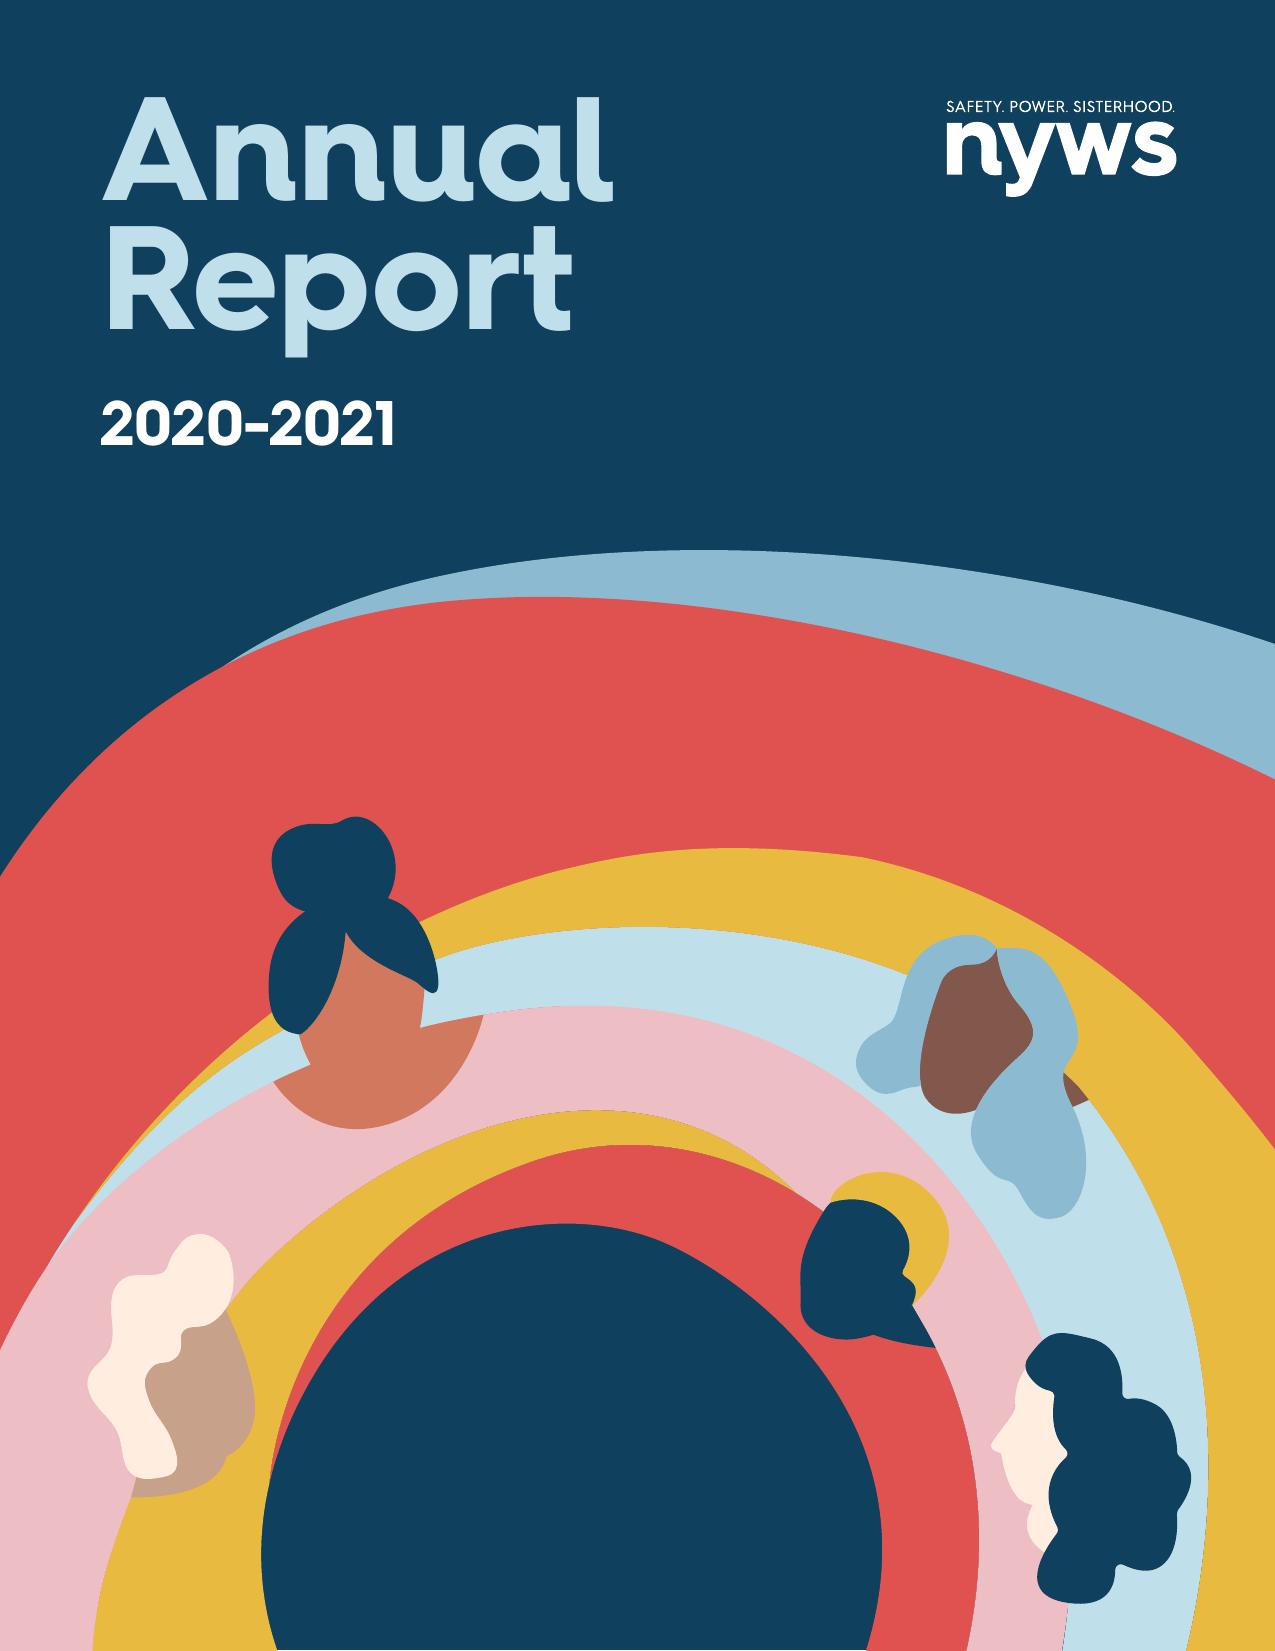 NYWS 2021 Annual Report